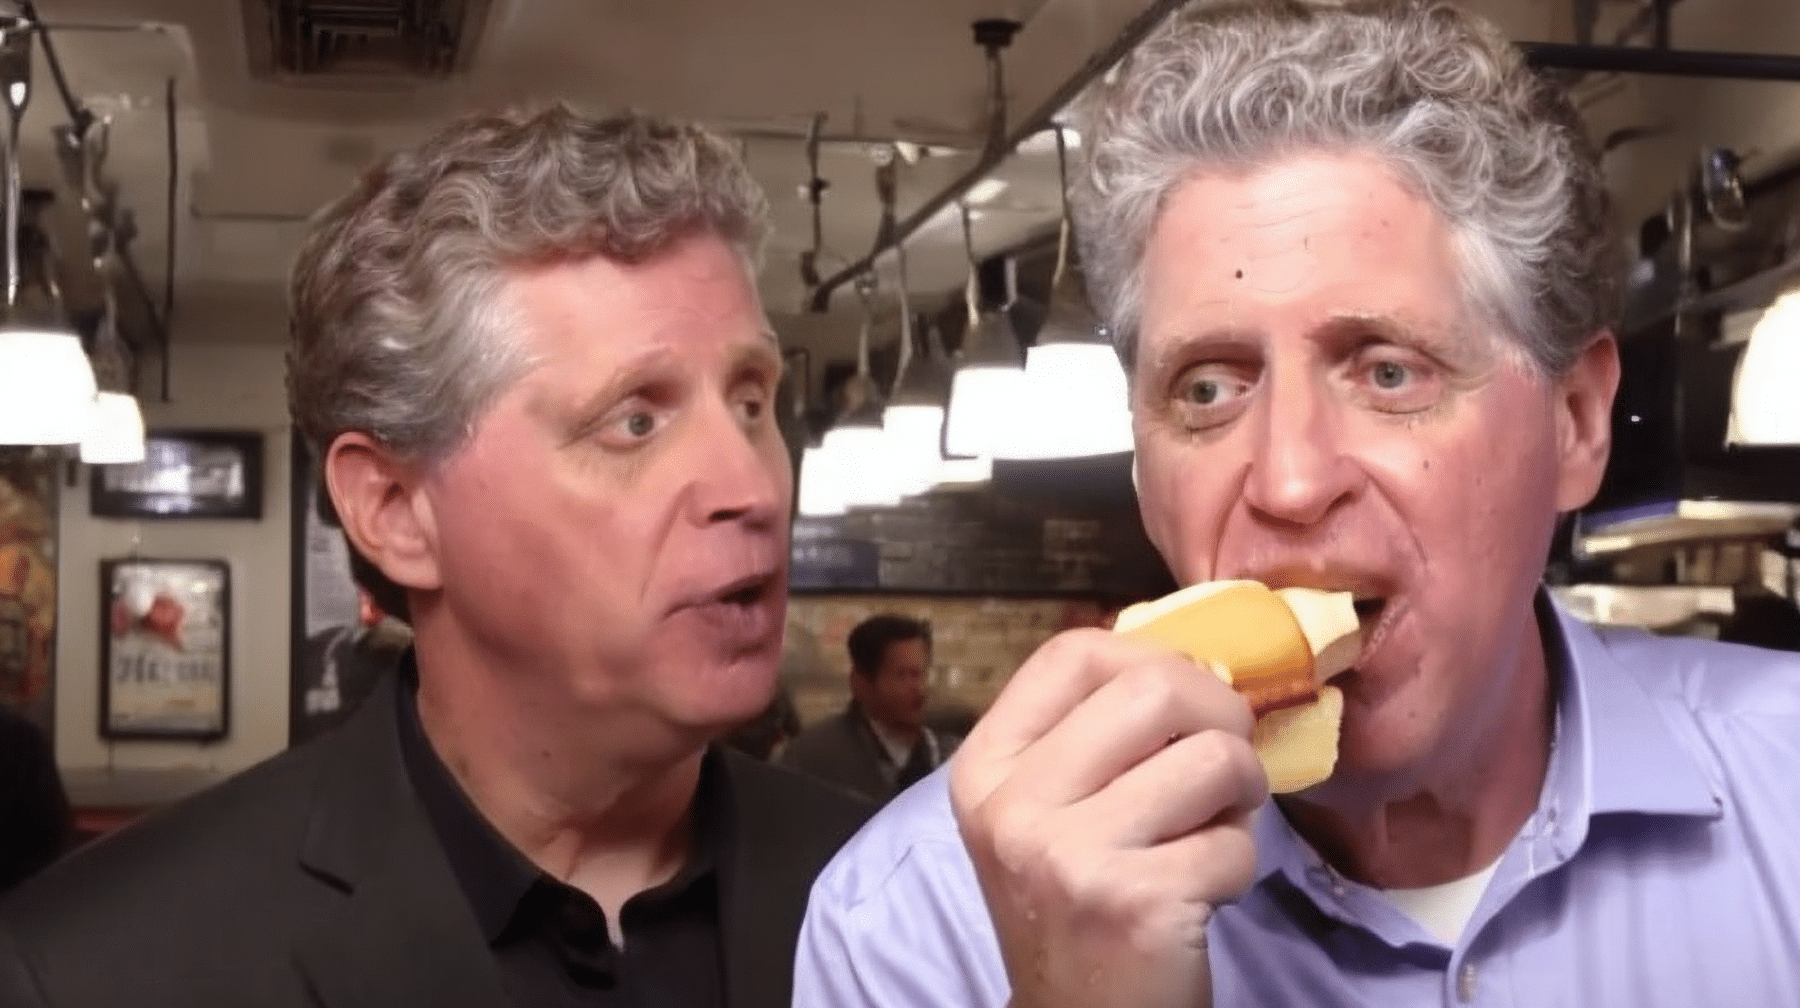 Governor McKee Cancels Multimillion-Dollar Contract Over Improperly Prepared Cheesesteak